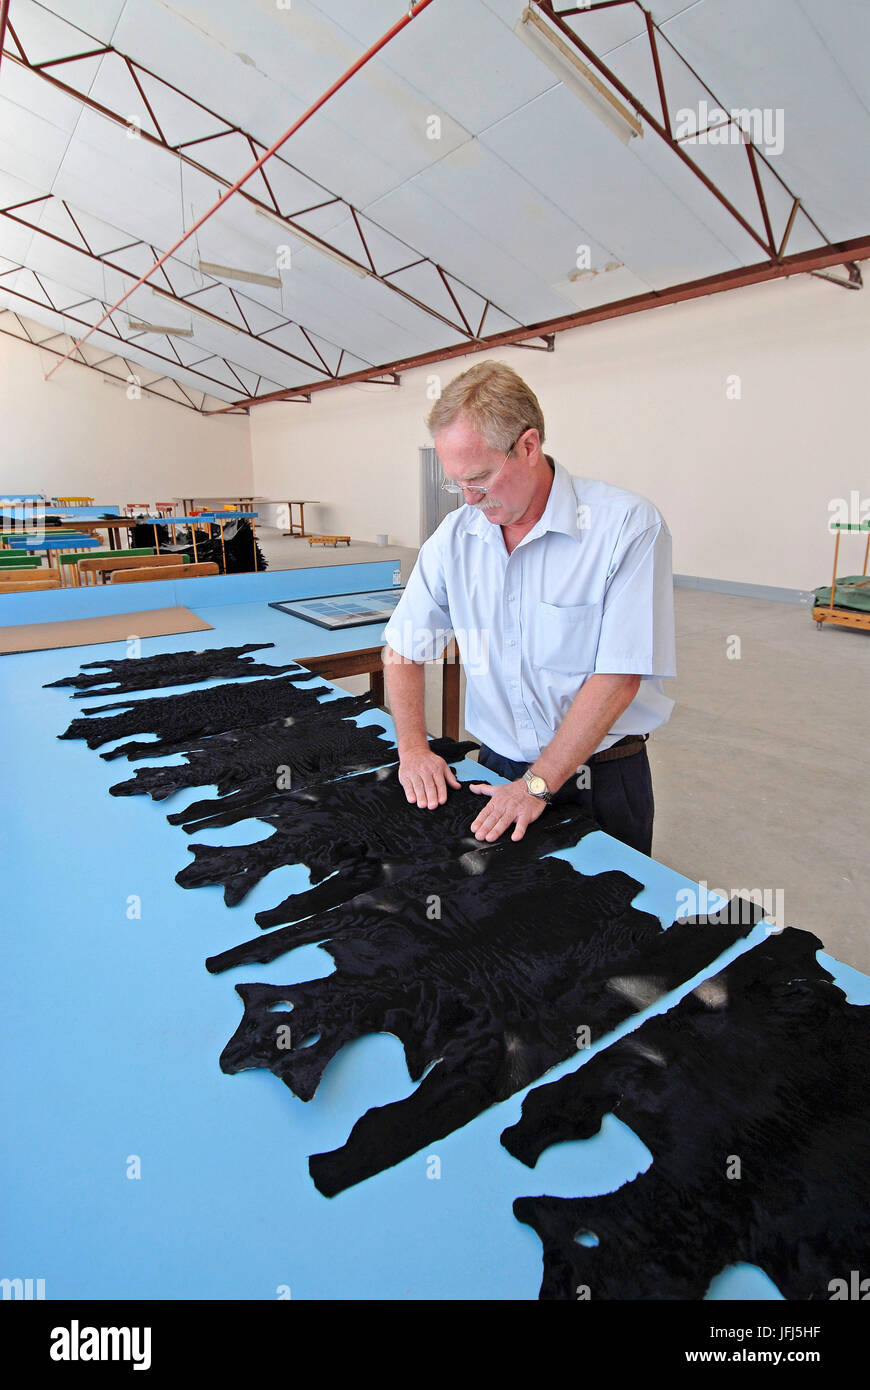 Africa, Namibia, Windhoek, Agra (agricultural company), man while the quality control of Karakul coats Stock Photo